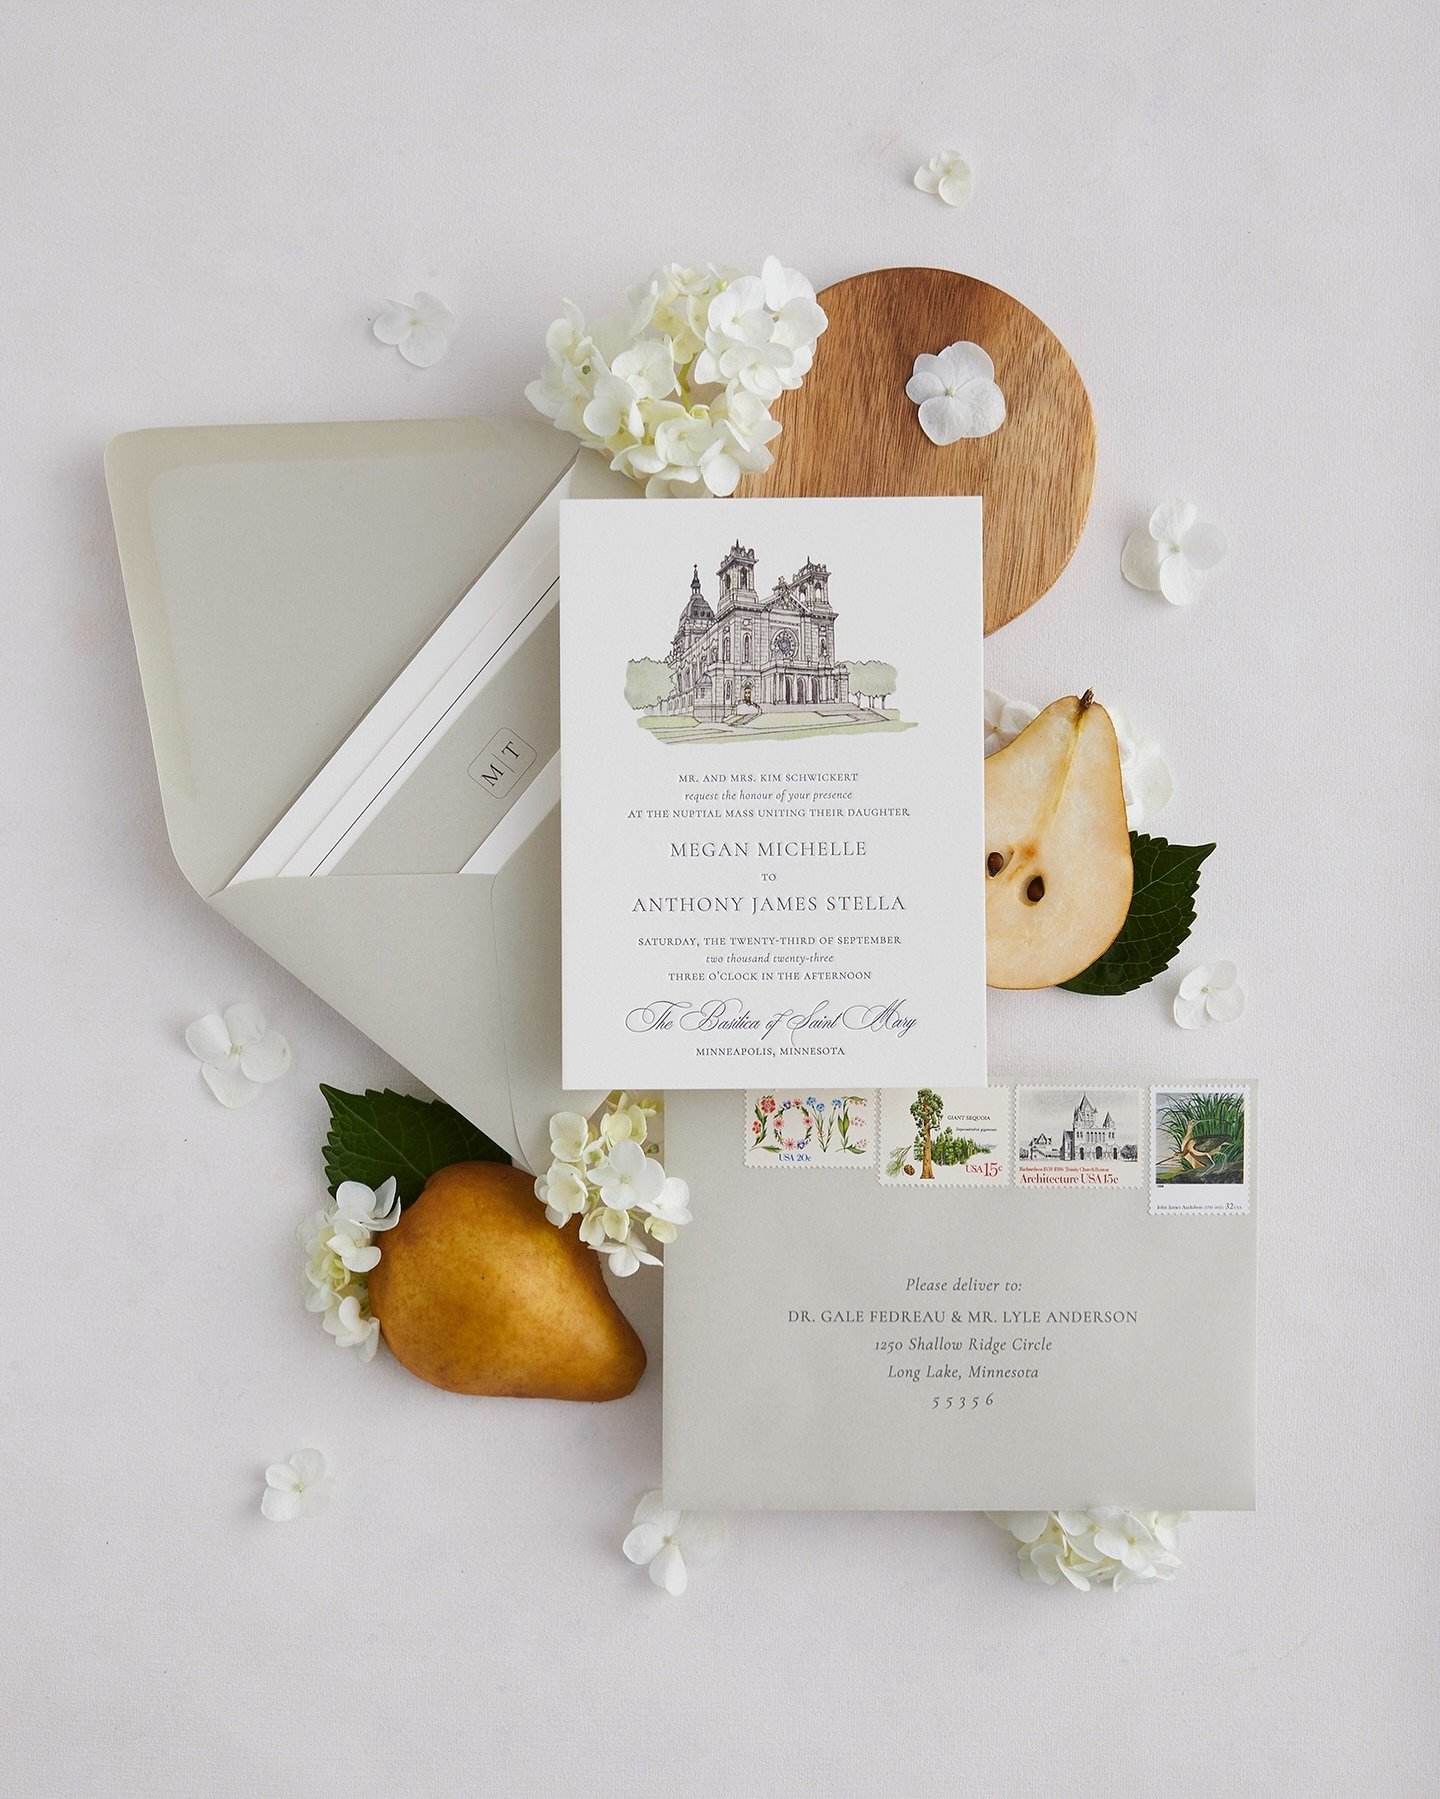 It&rsquo;s the illustrated artwork, the font choices and layout, the pillowy letterpress on double thick cotton paper, it&rsquo;s the subtle moss green and white color palette, the layering of inserts in the envelope, the clean, modern monogram&helli